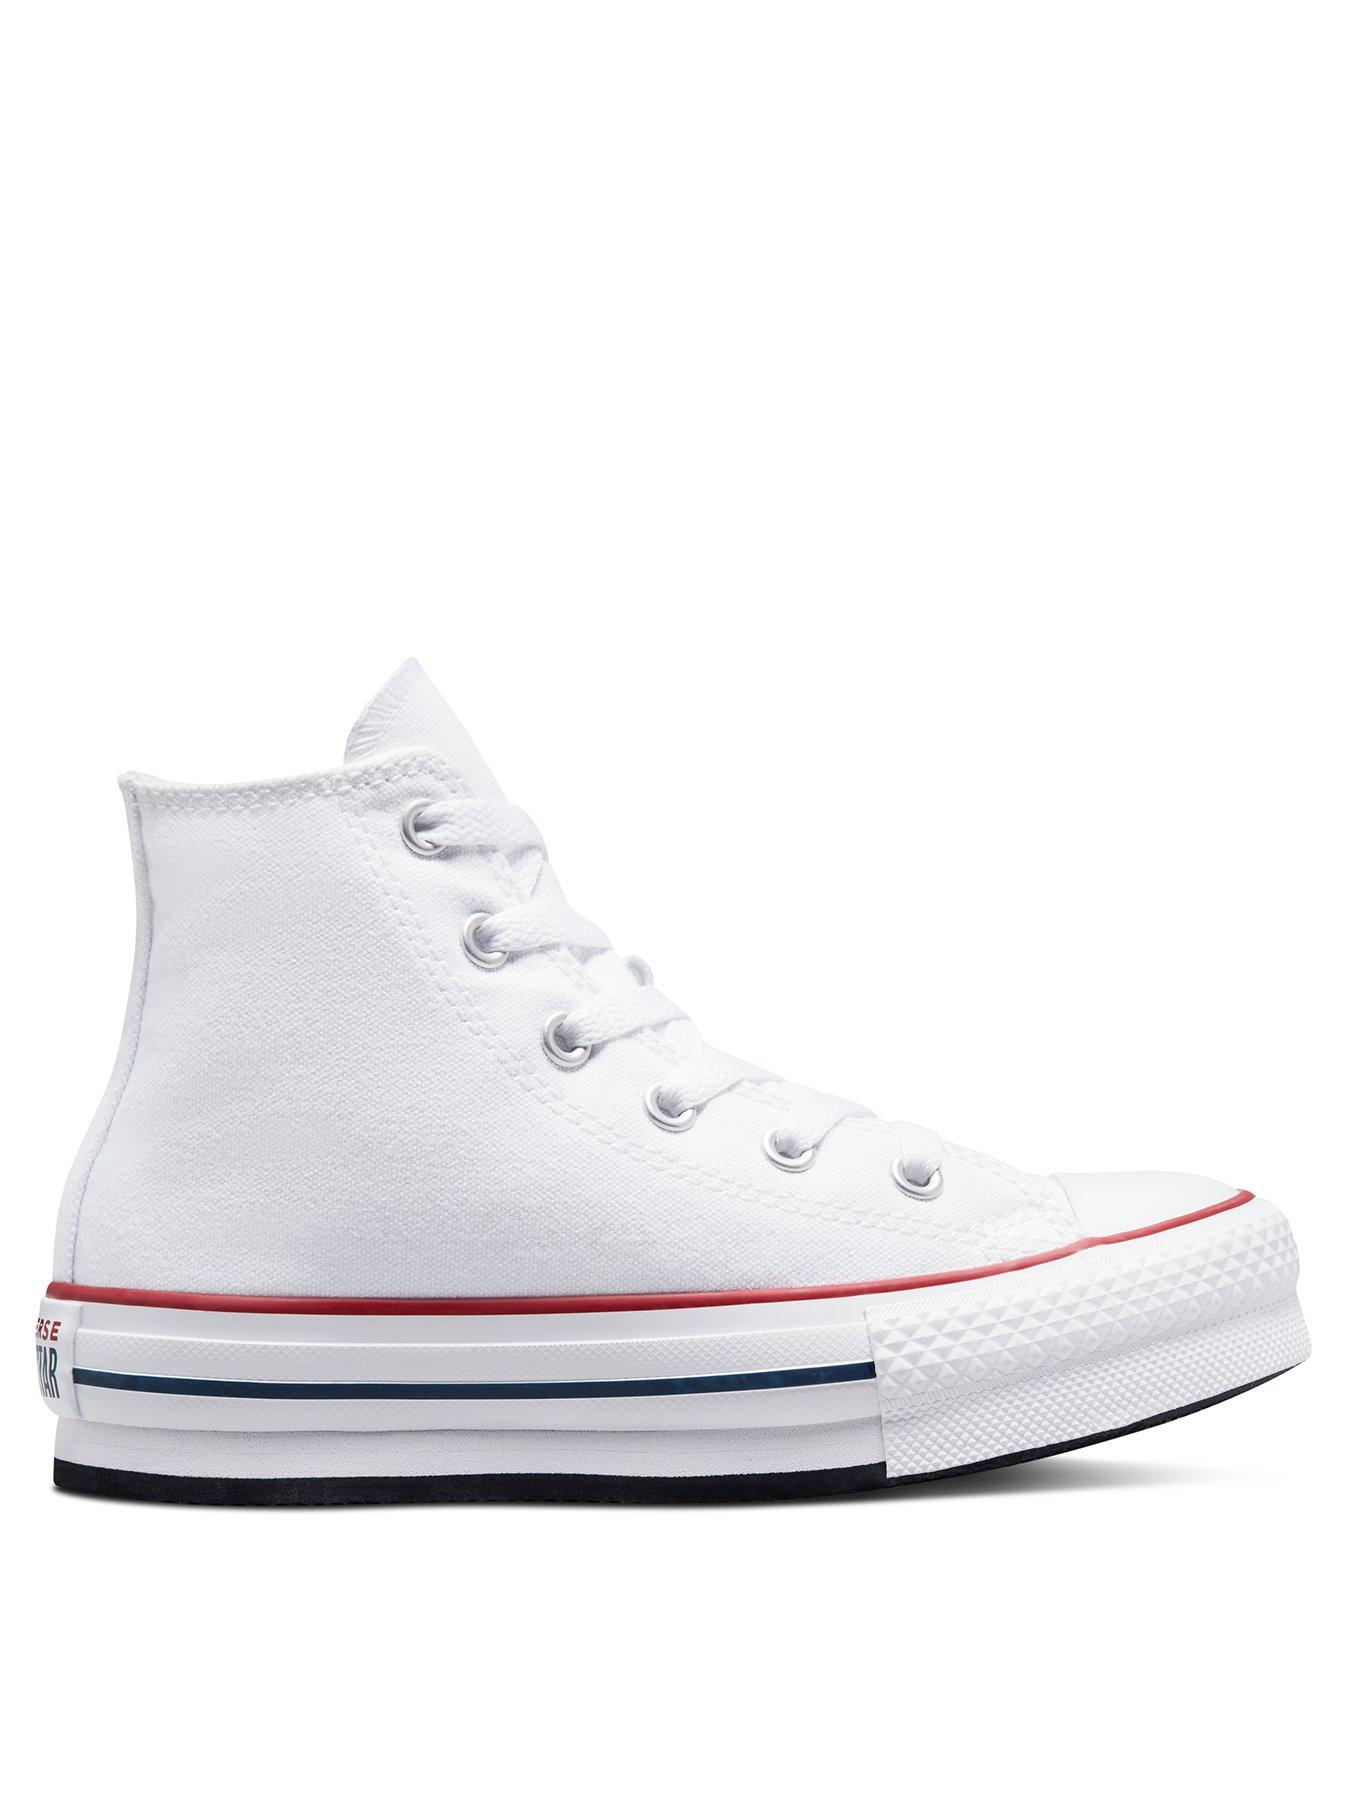 Converse Kids Girls Eva Lift Canvas Hi Top Trainers - White, White, Size 10 Younger